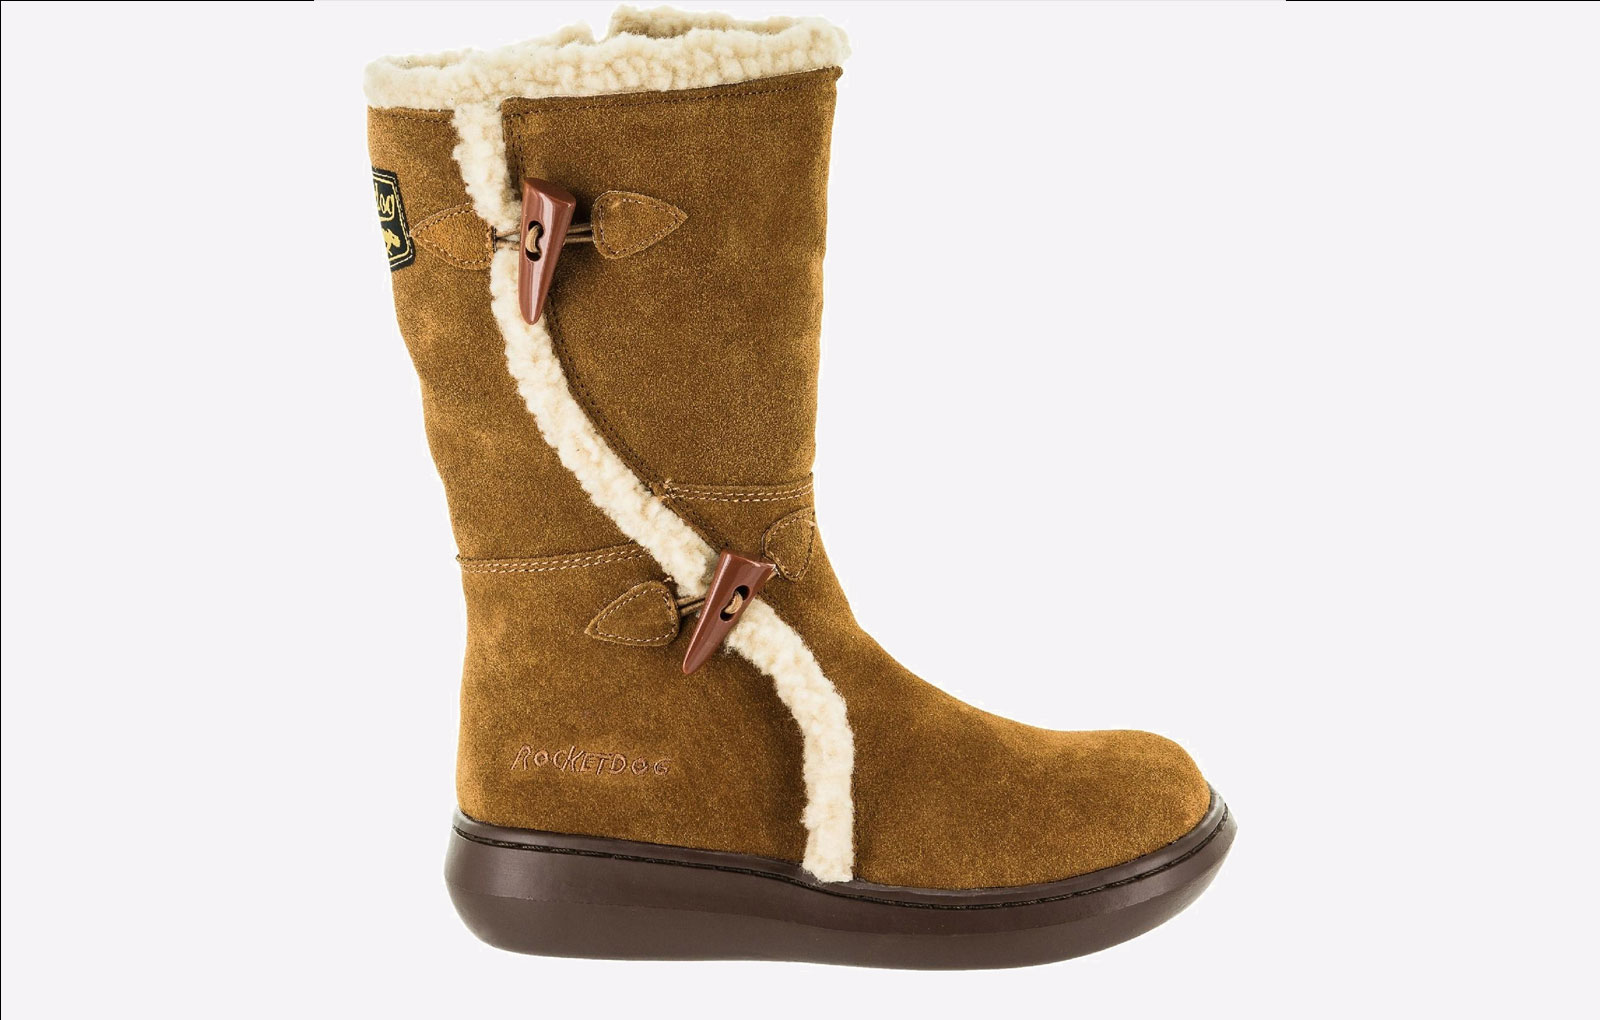 Rocket Dog Slope Mid-Calf Suede Winter Boot Womens - GRD-29581-50160-08